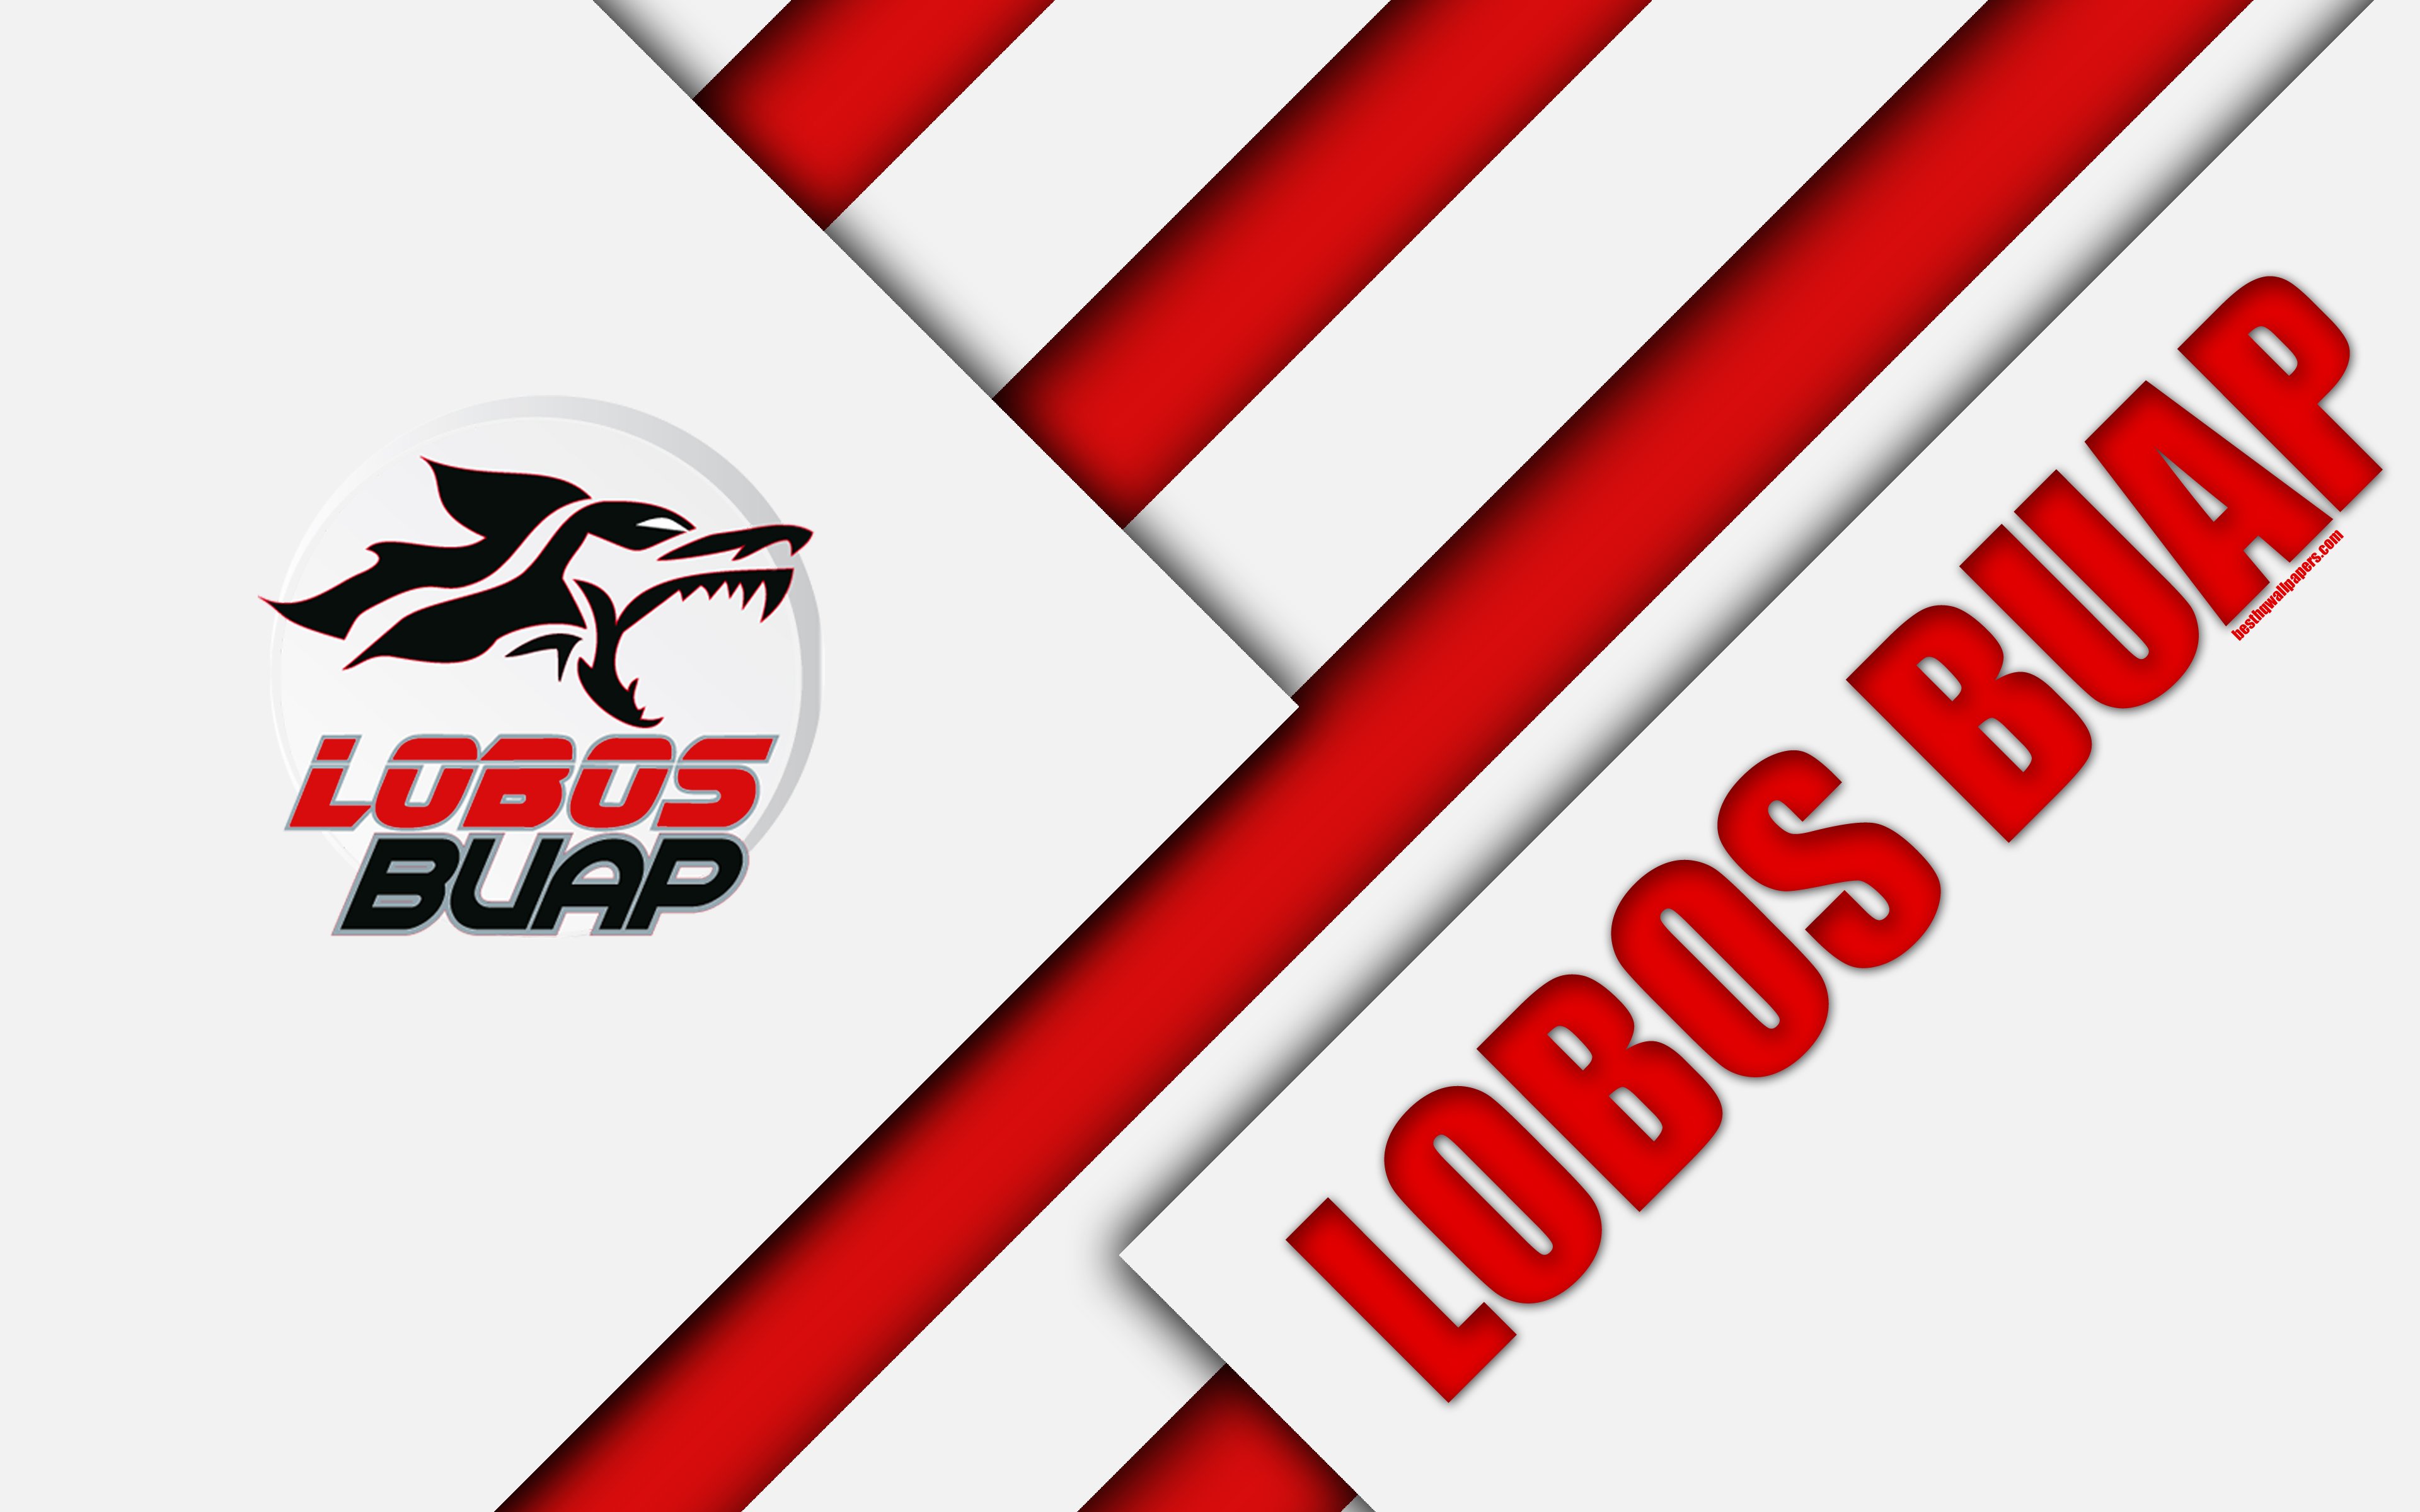 Download wallpapers Lobos BUAP, 4k, Mexican Football Club, material design,  logo, white red abstraction, Puebla de Zaragoza, Mexico, Primera Division,  Liga MX for desktop with resolution 3840x2400. High Quality HD pictures  wallpapers